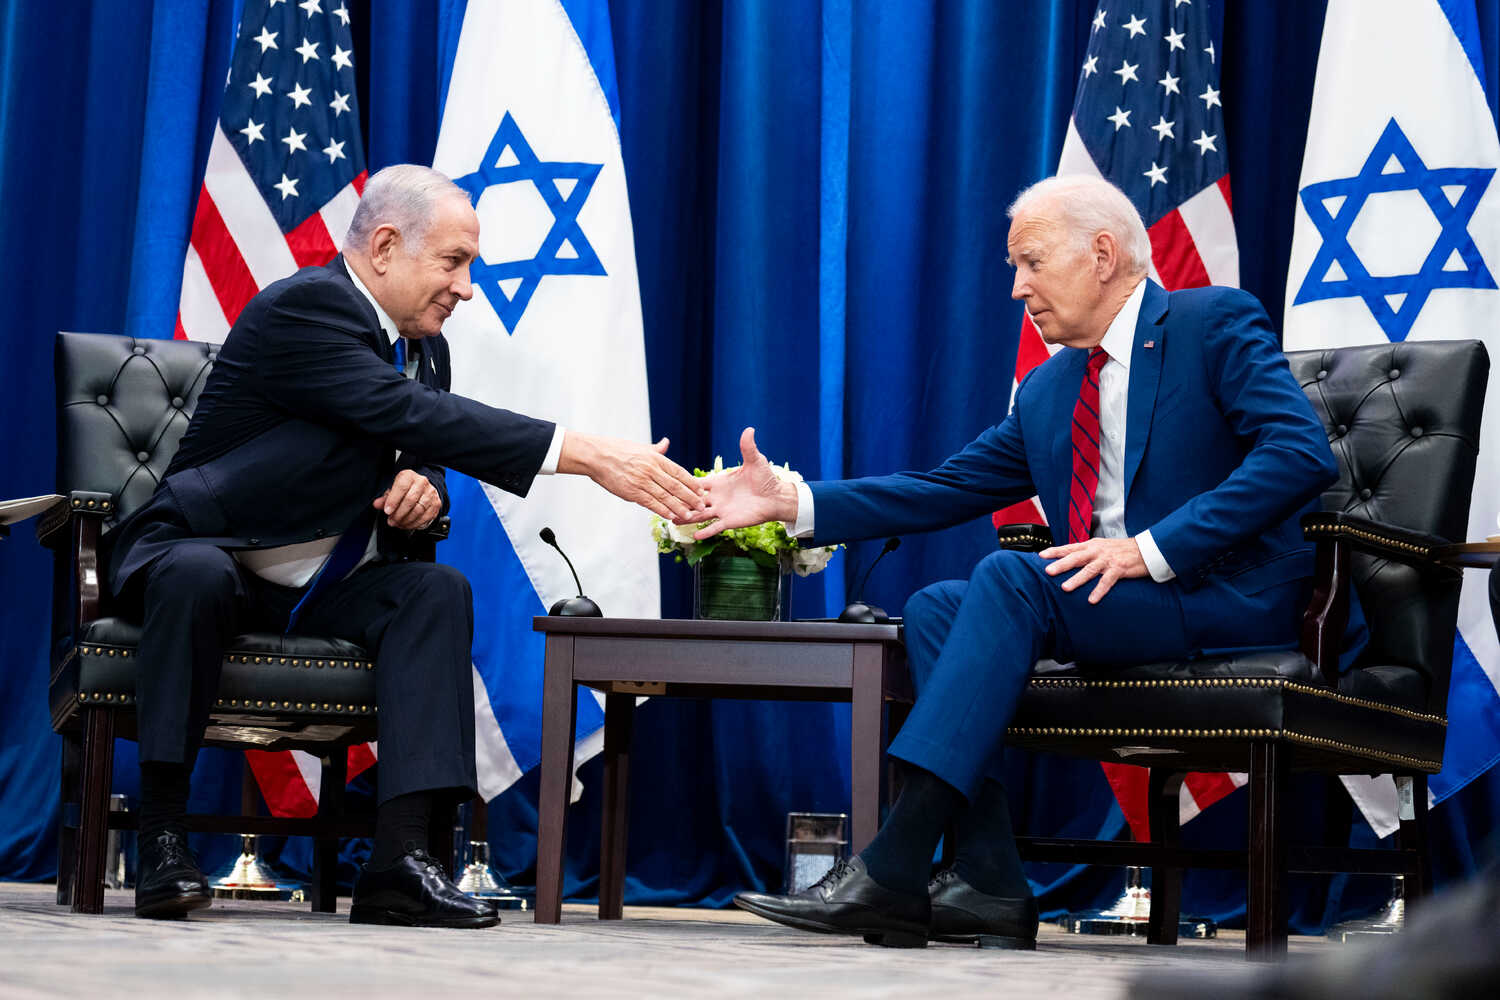 Biden's recent meeting with Netanyahu during the U.N. General Assembly.